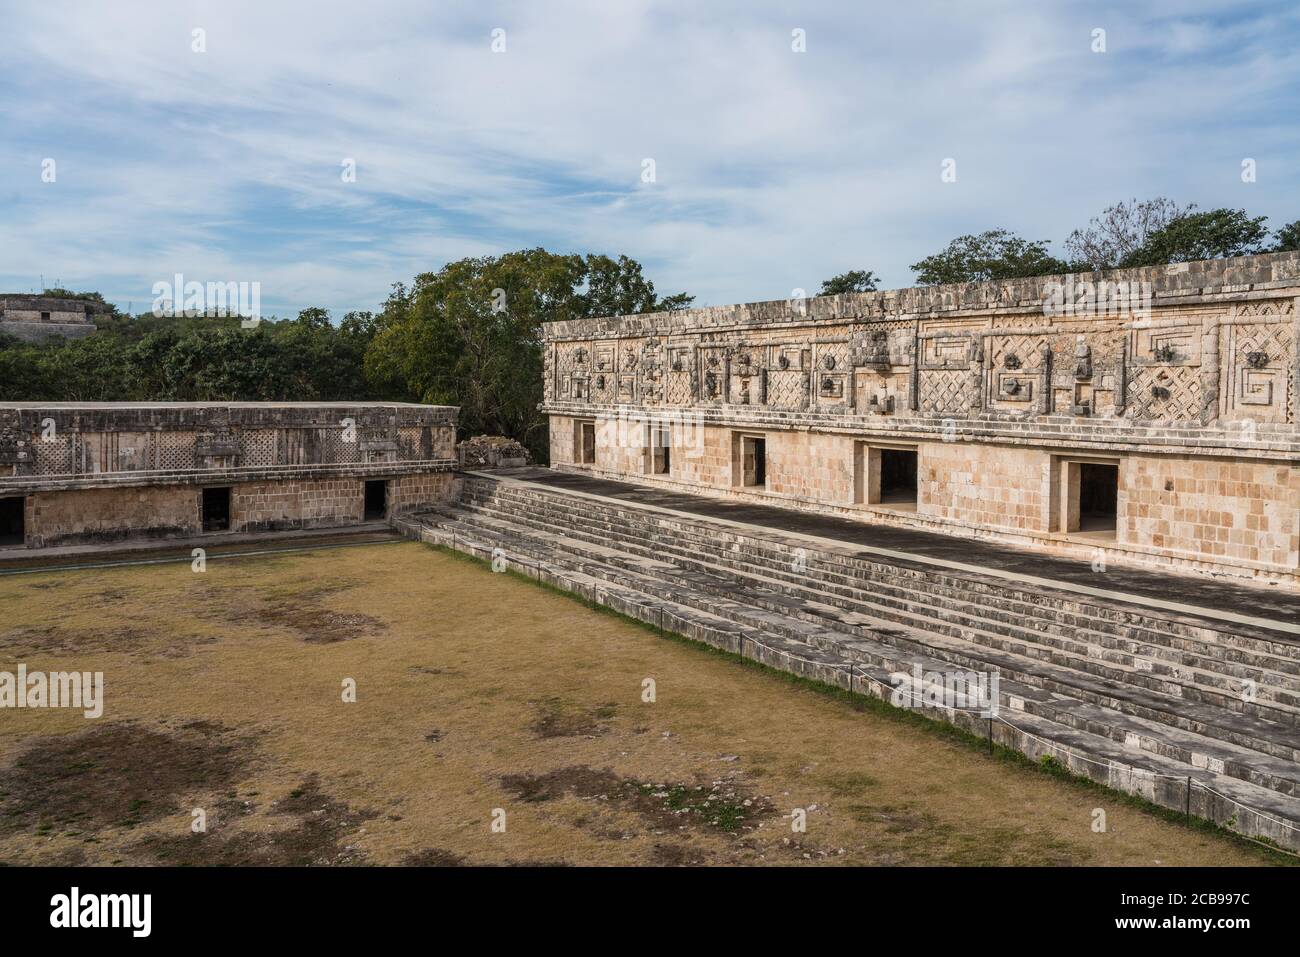 The south and west buildings of the Nunnery Quadrangle in the pre-Hispanic Mayan ruins of Uxmal, Mexico. Stock Photo